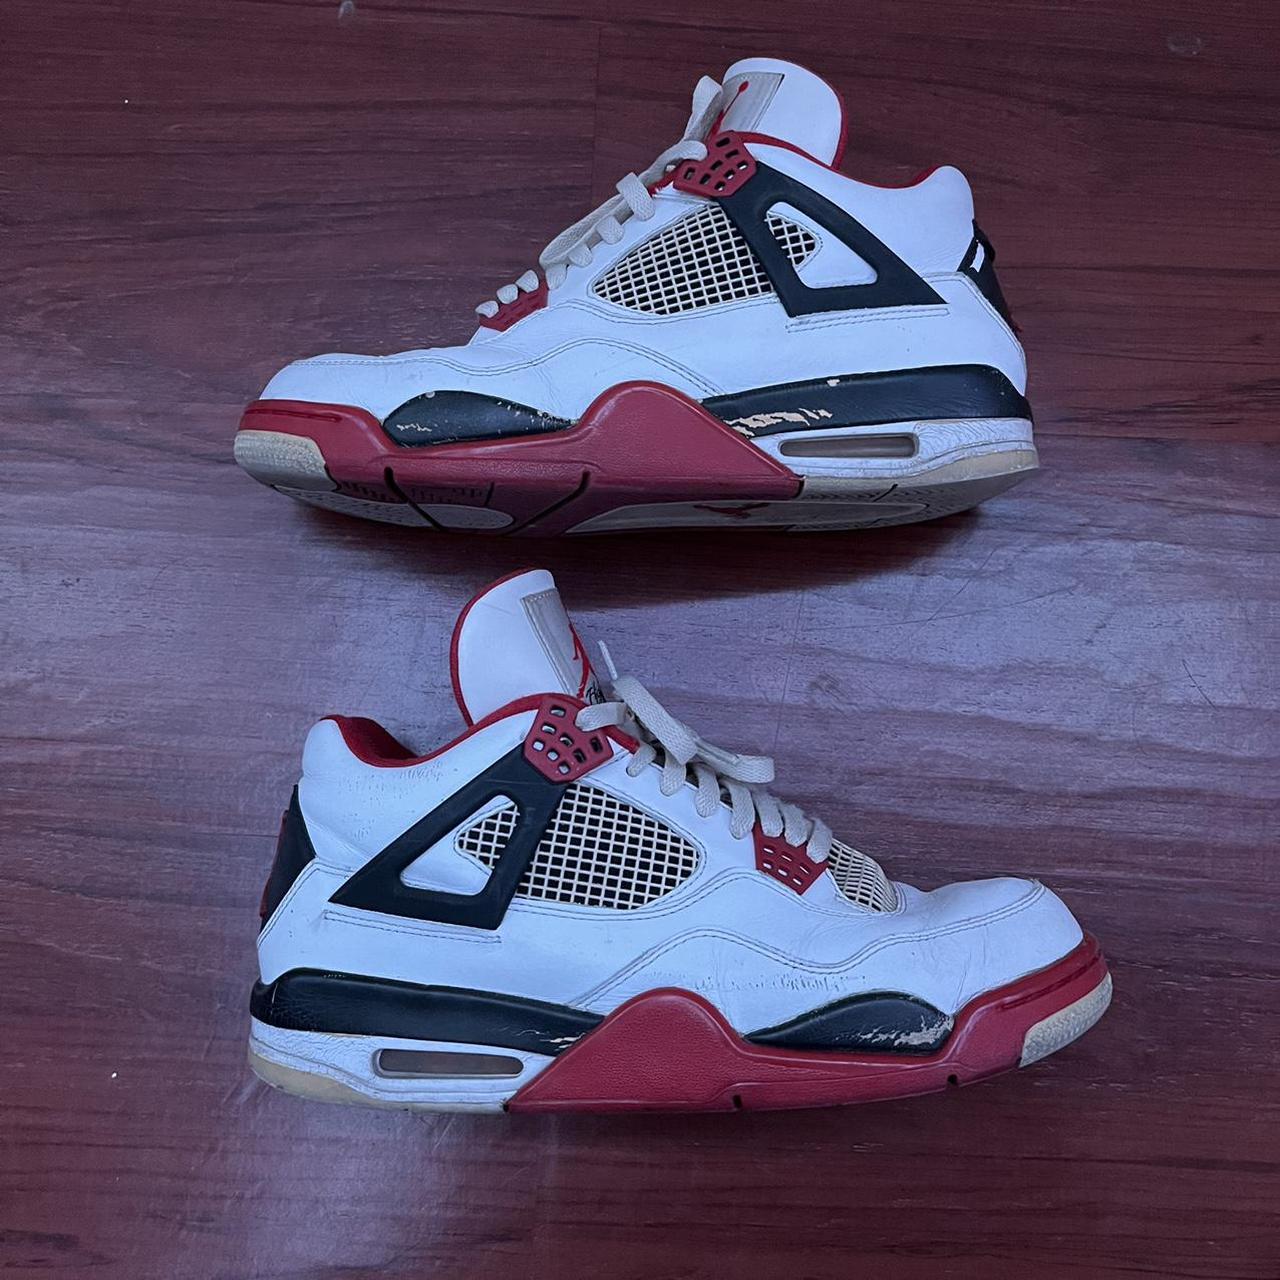 Product Image 1 - Jordan Fire Red 4s
-Size 10.5
-back